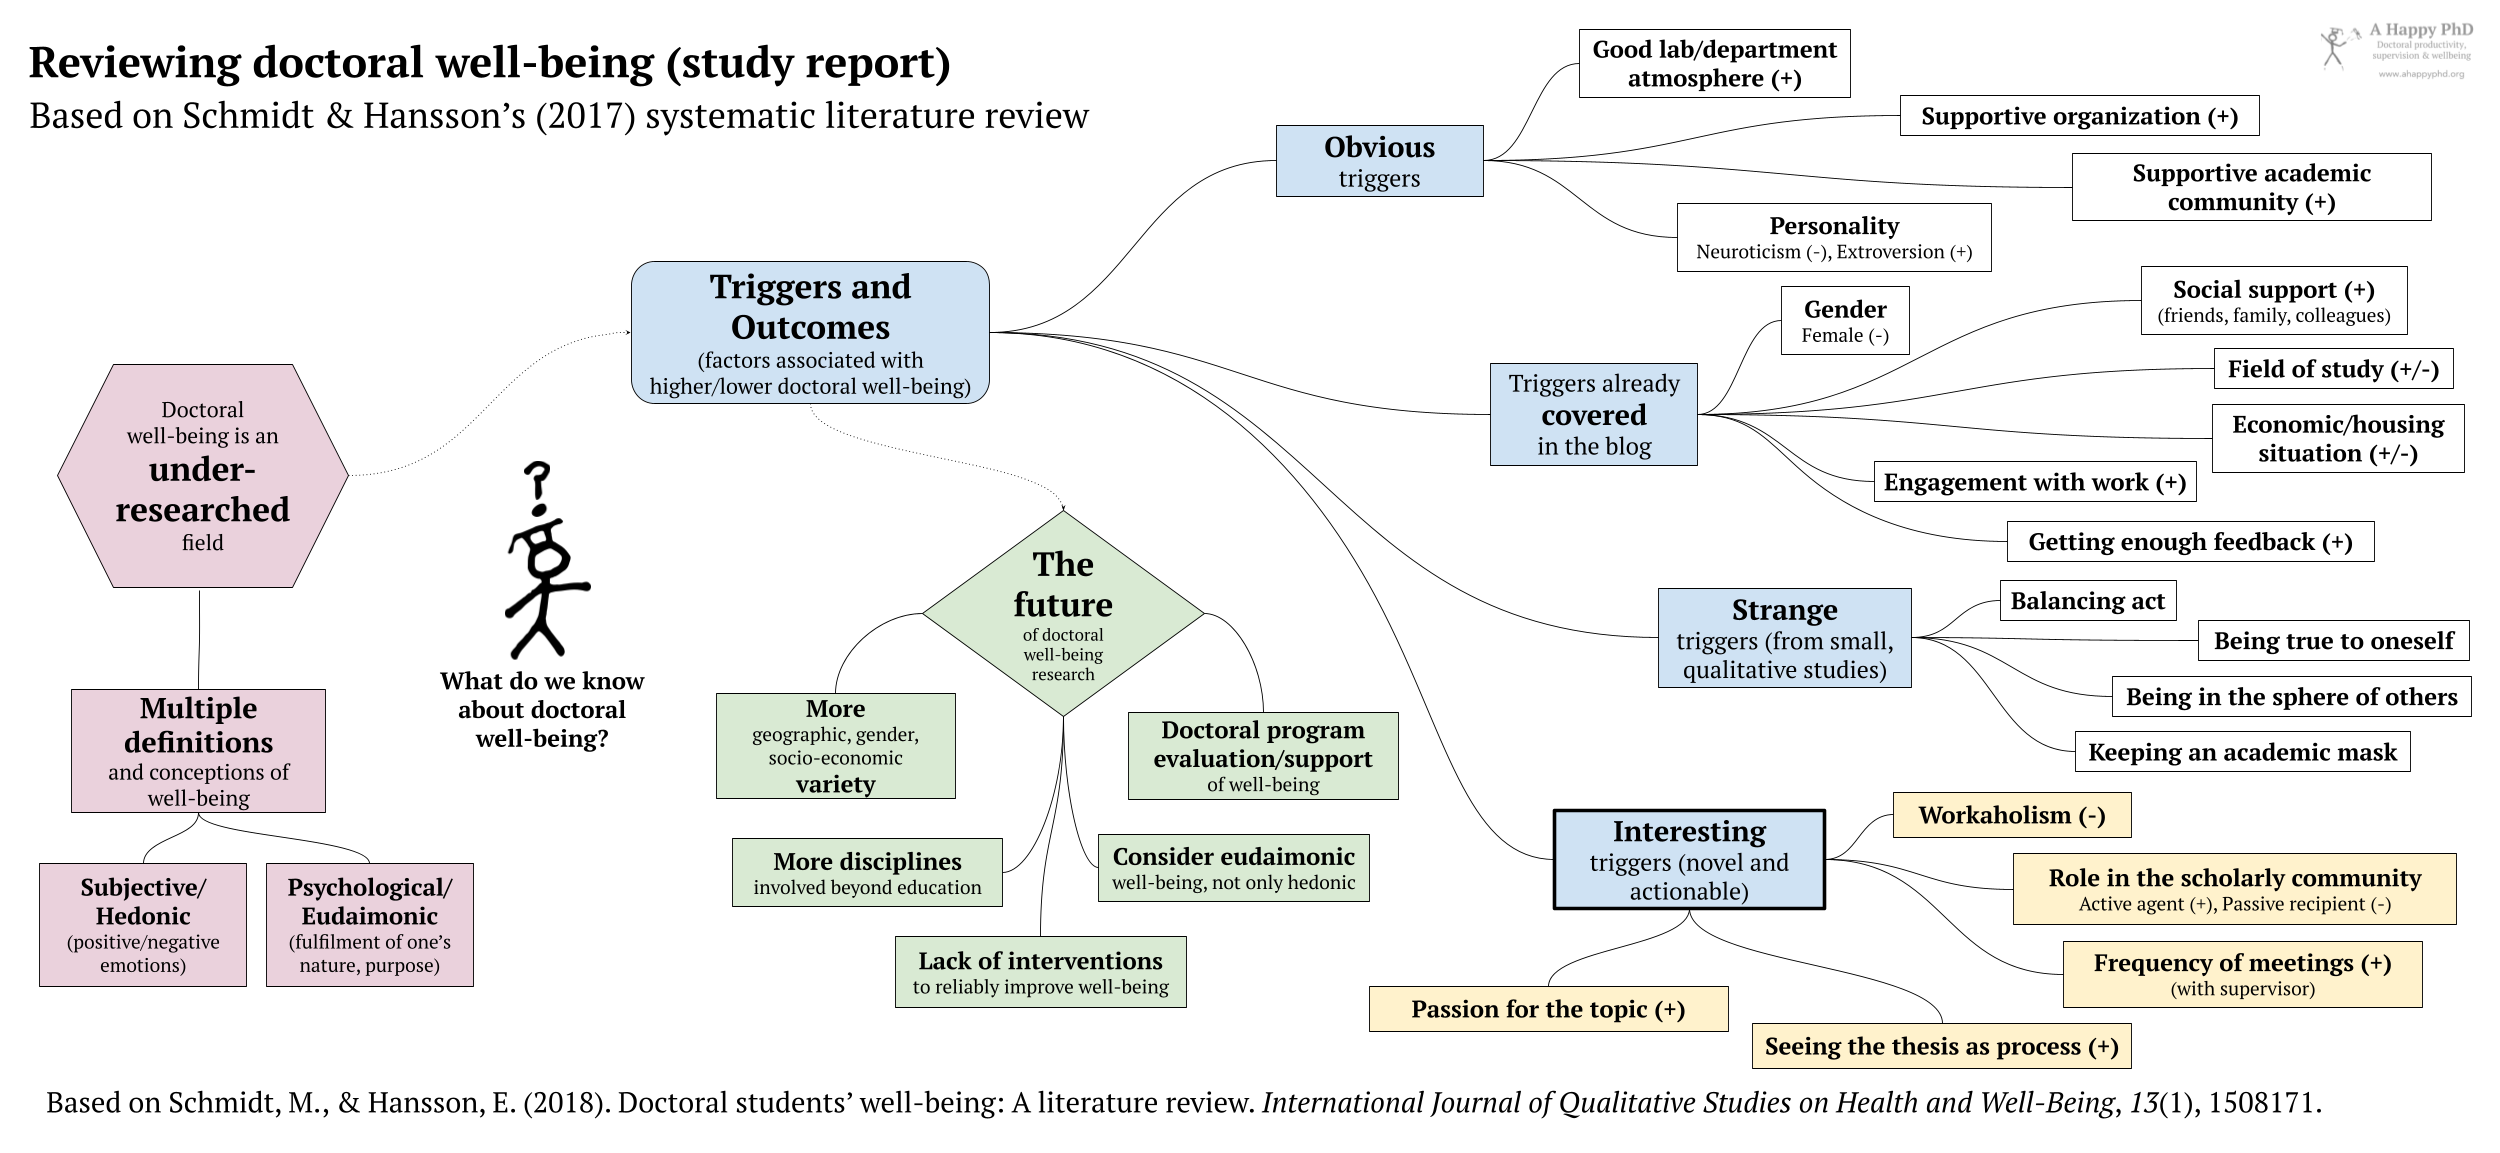 Conceptions of wellbeing, triggers/outcomes, and future research on doctoral well-being